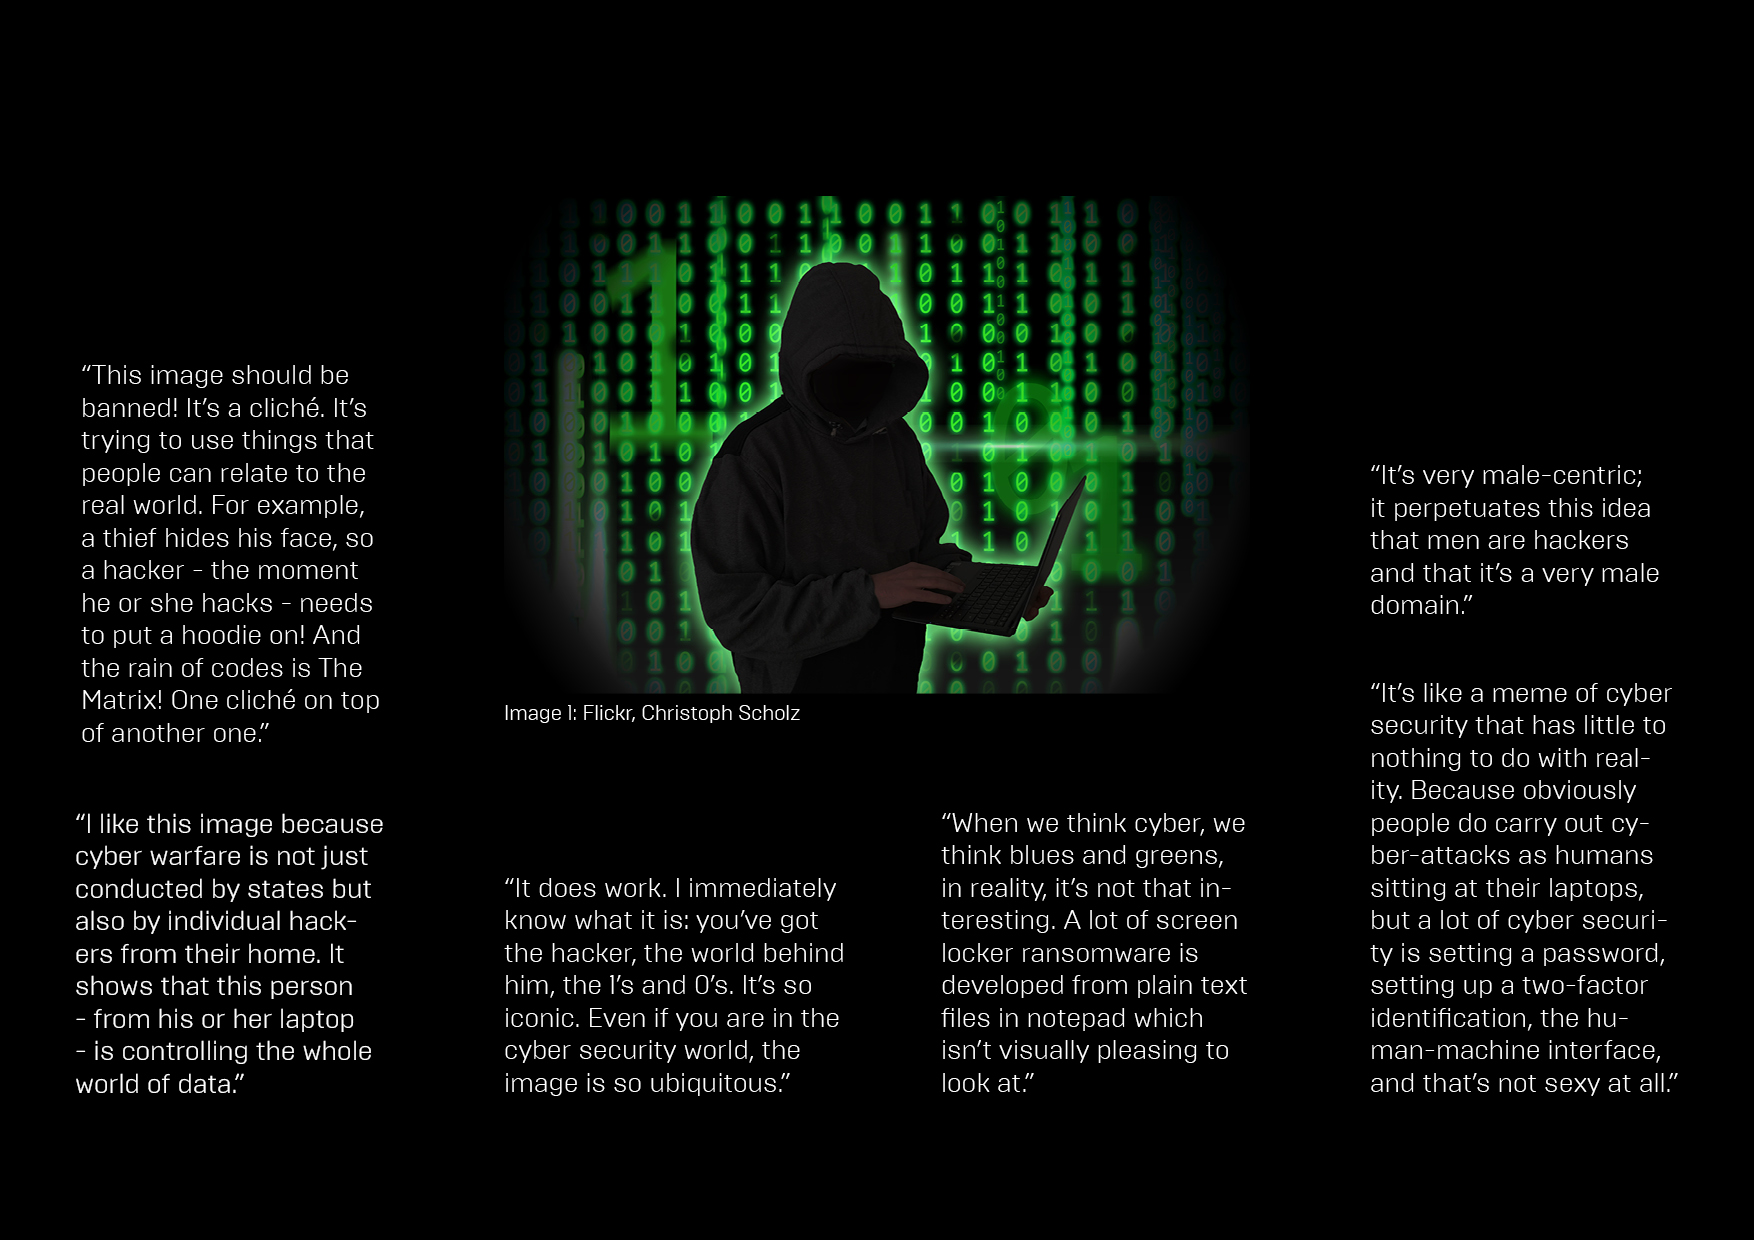 The hooded guy on the laptop: What are cyber pictures telling us?